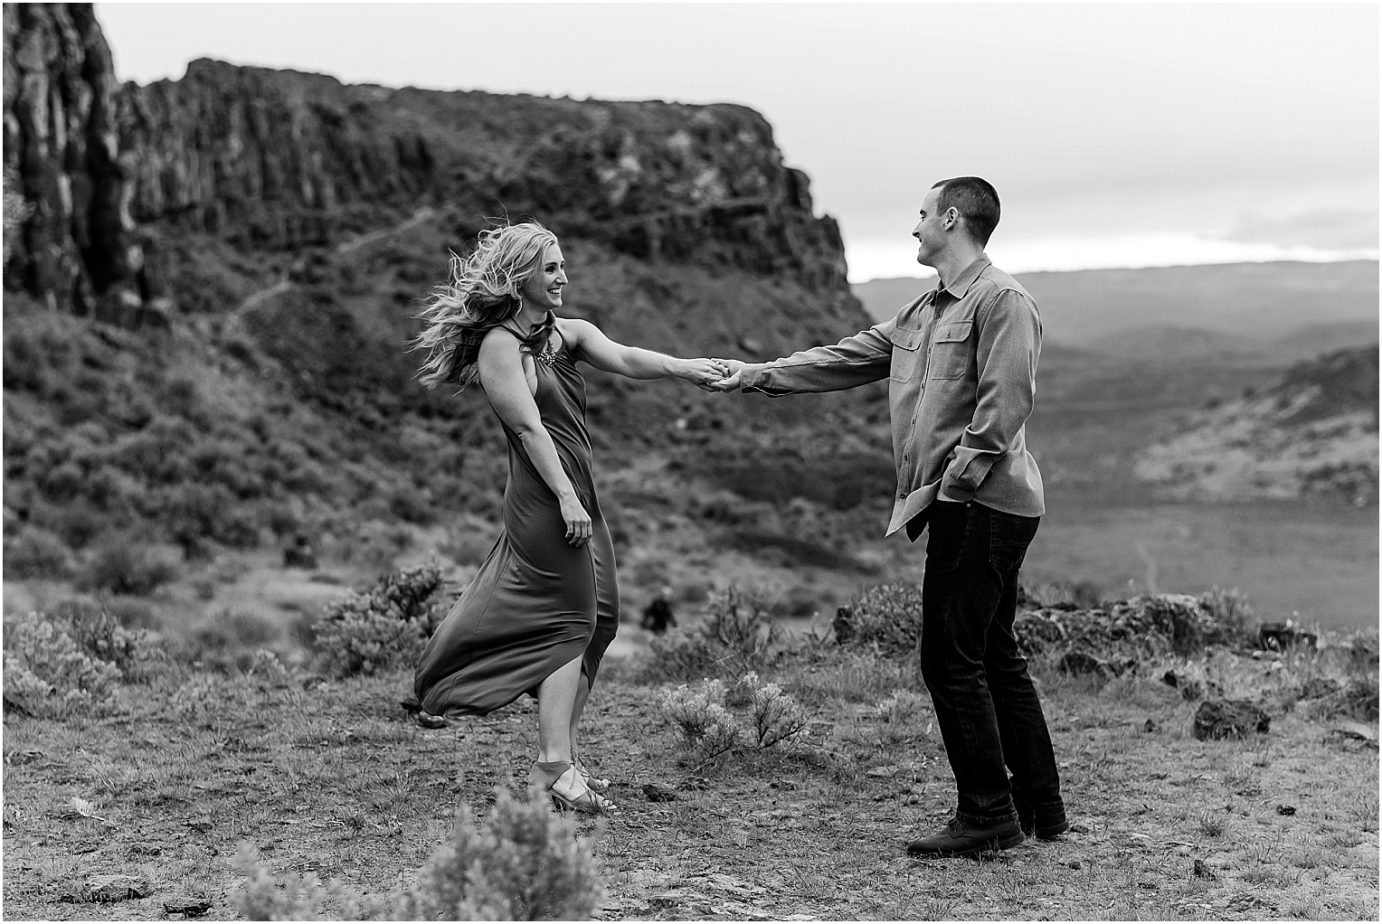 Frenchman Coulee Engagement Session Vantage Photographer Doug and Sarah